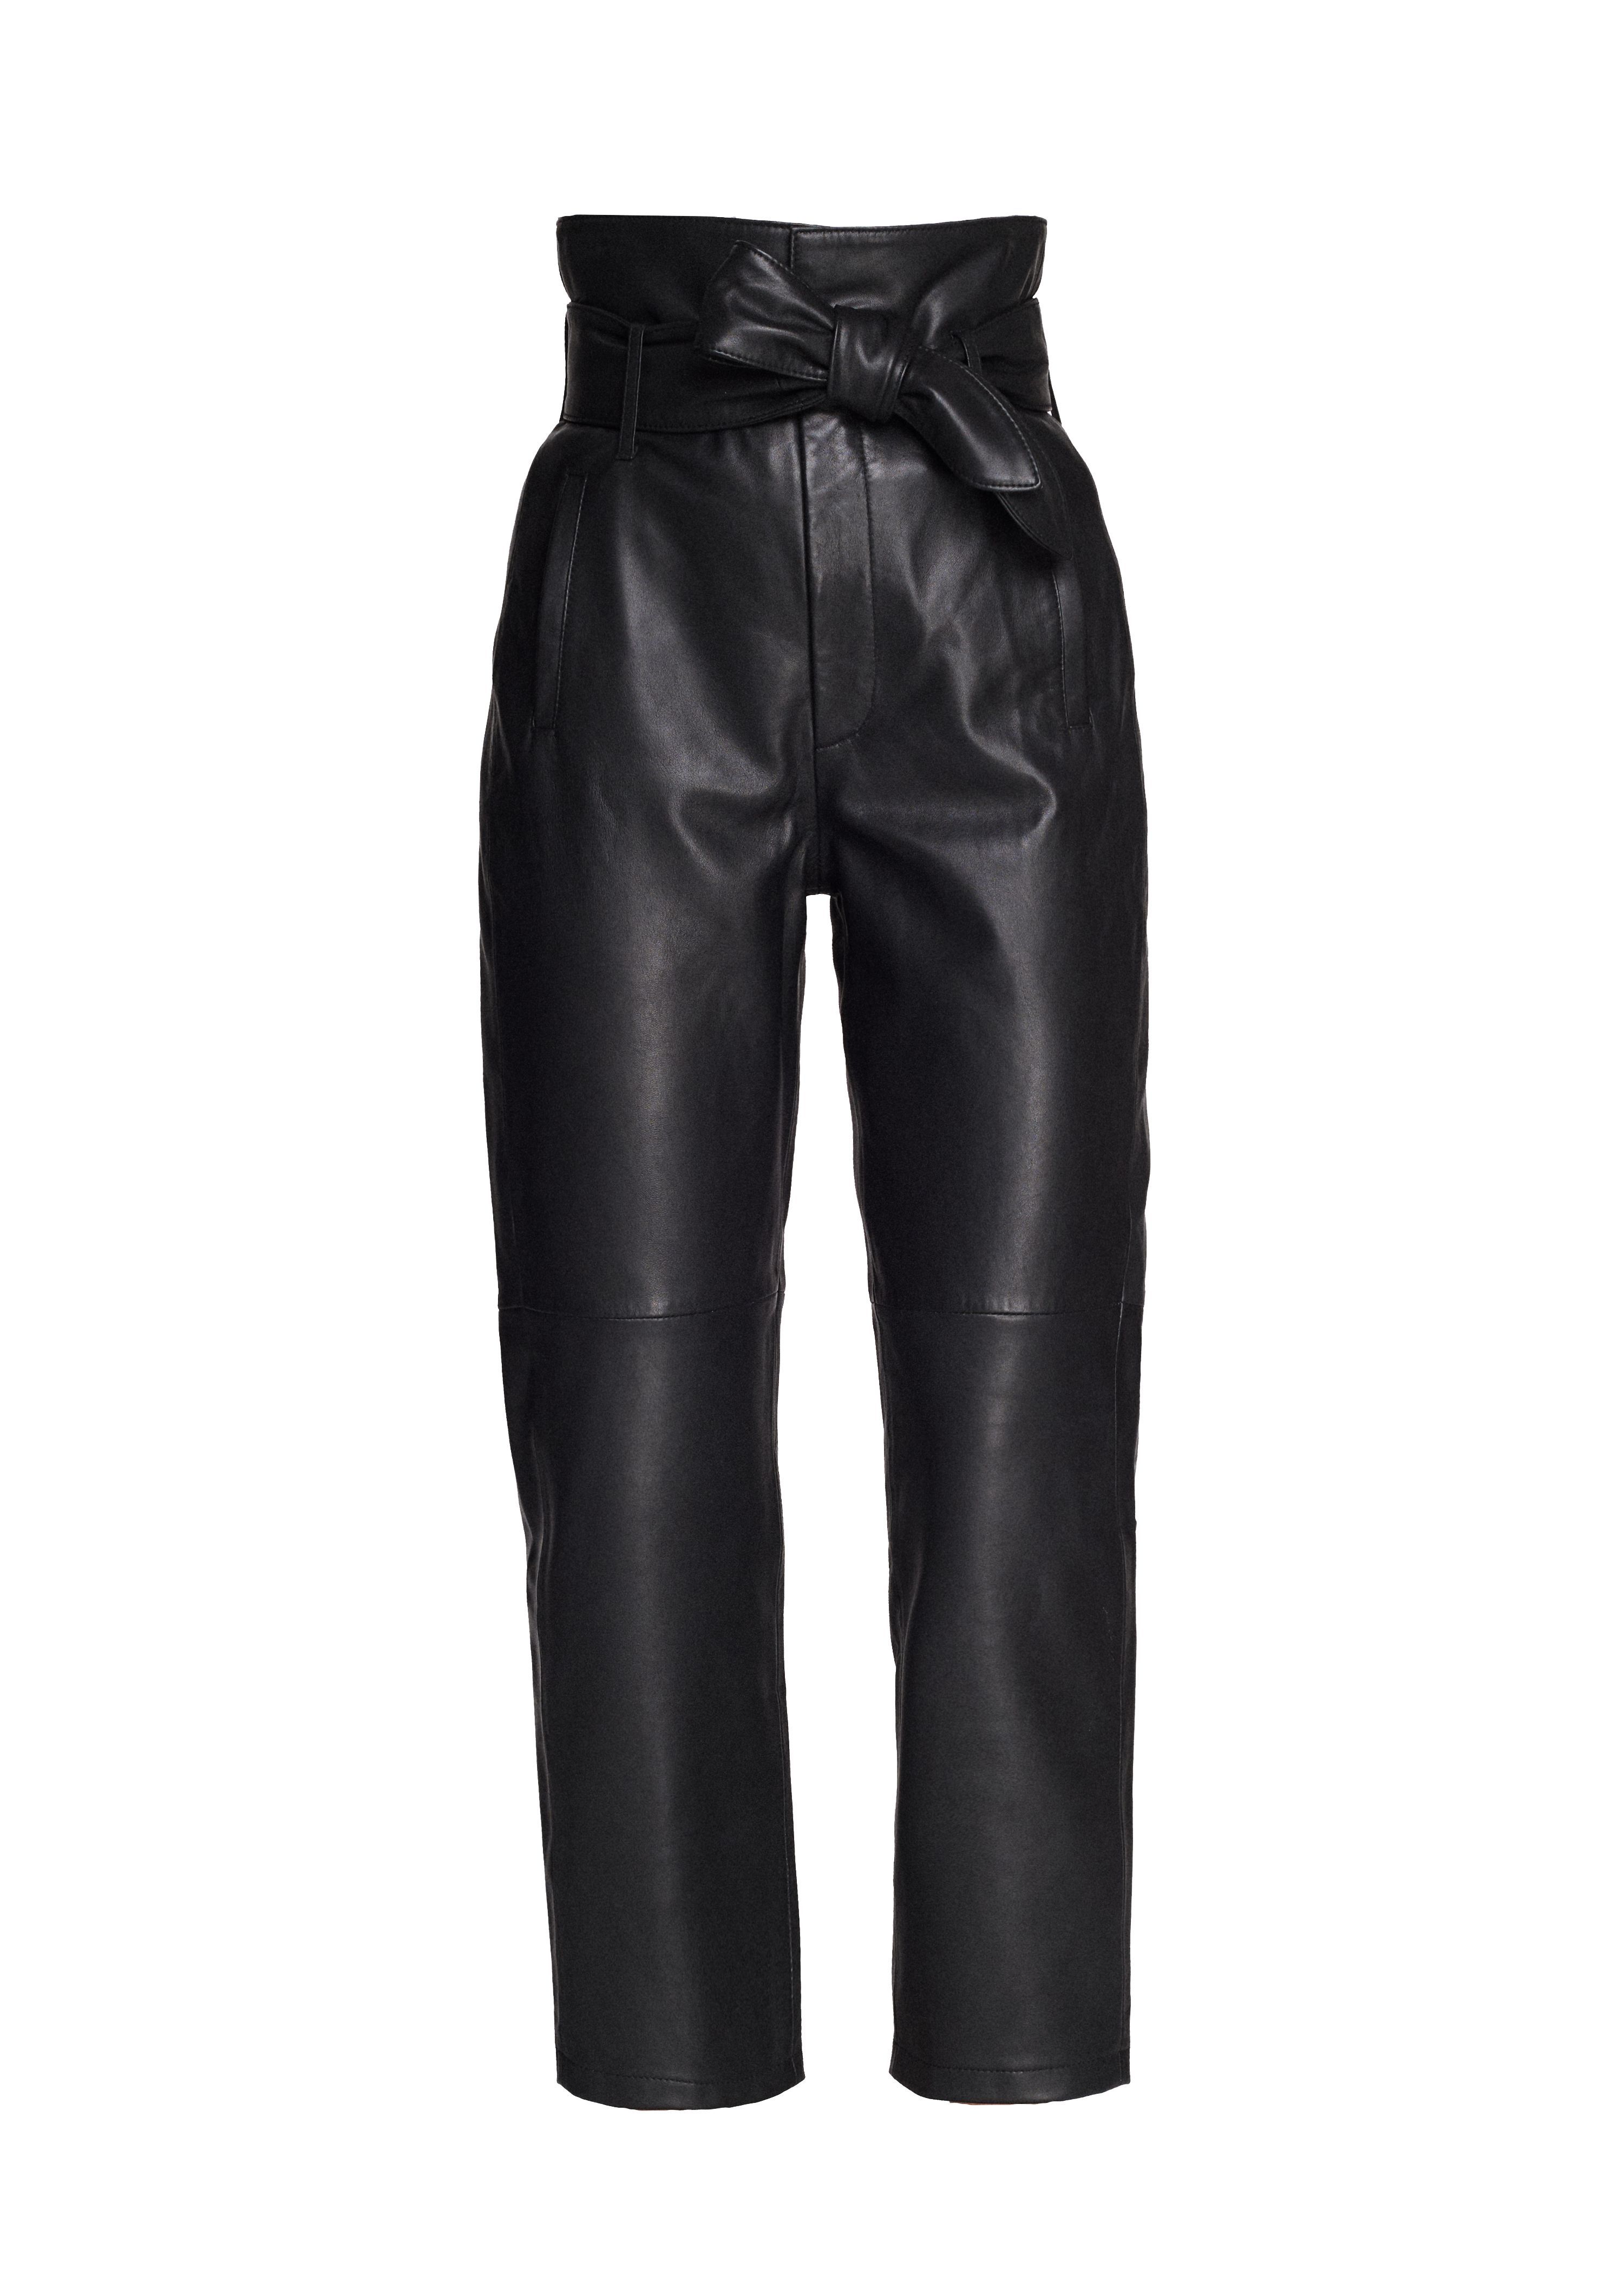 Brennan Leather Pant in Black (for similar style)